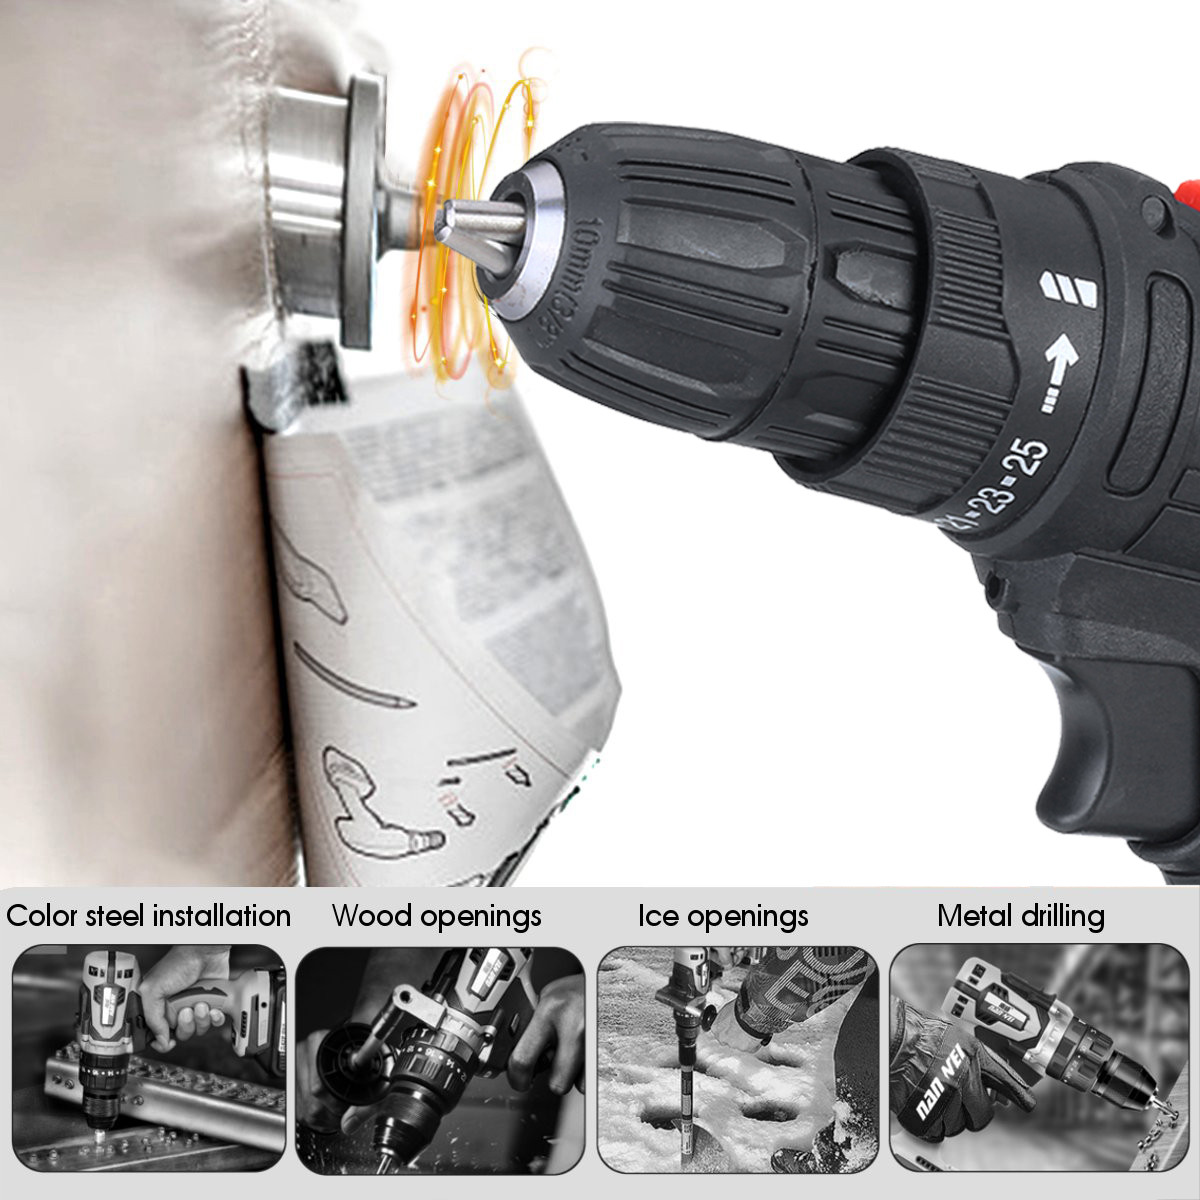 3-in-1-12V-Cordless-Electric-Impact-Hammer-Drill-Screwdriver-Metal-Wood-Drilling-Tool-W-2pcs-Battery-1787626-7